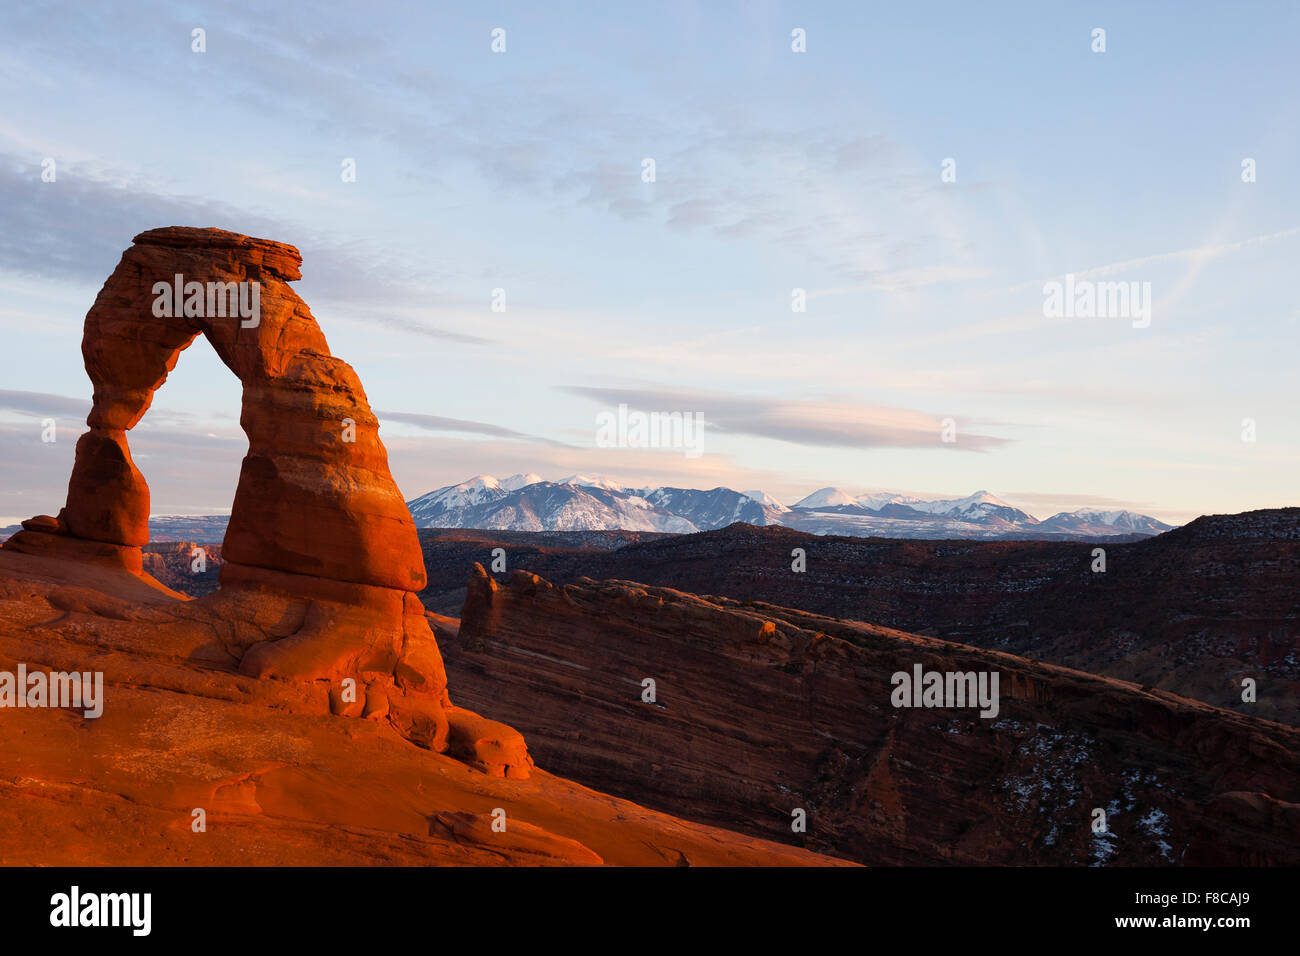 Arches National Park, Utah, USA. Spectacular sunset over Delicate Arch, Utah. Stock Photo